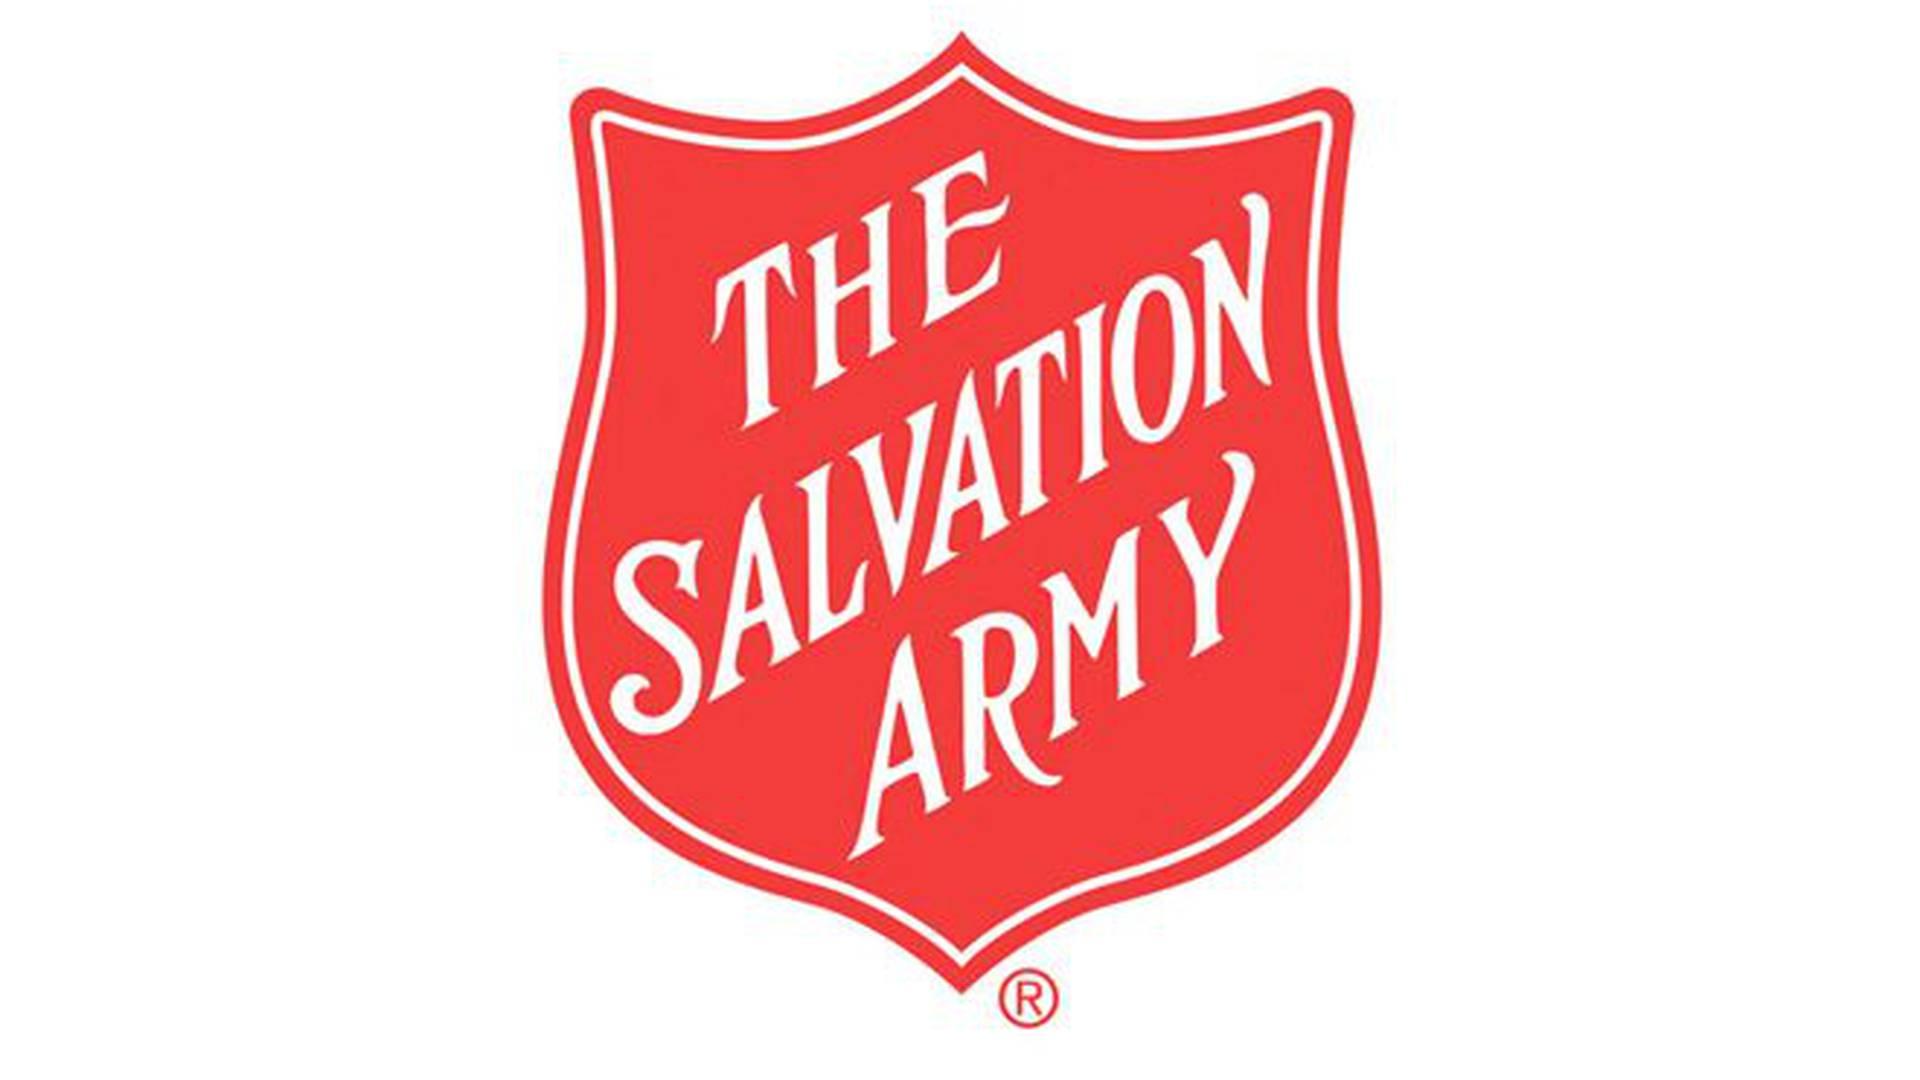 The Salvation Army photo